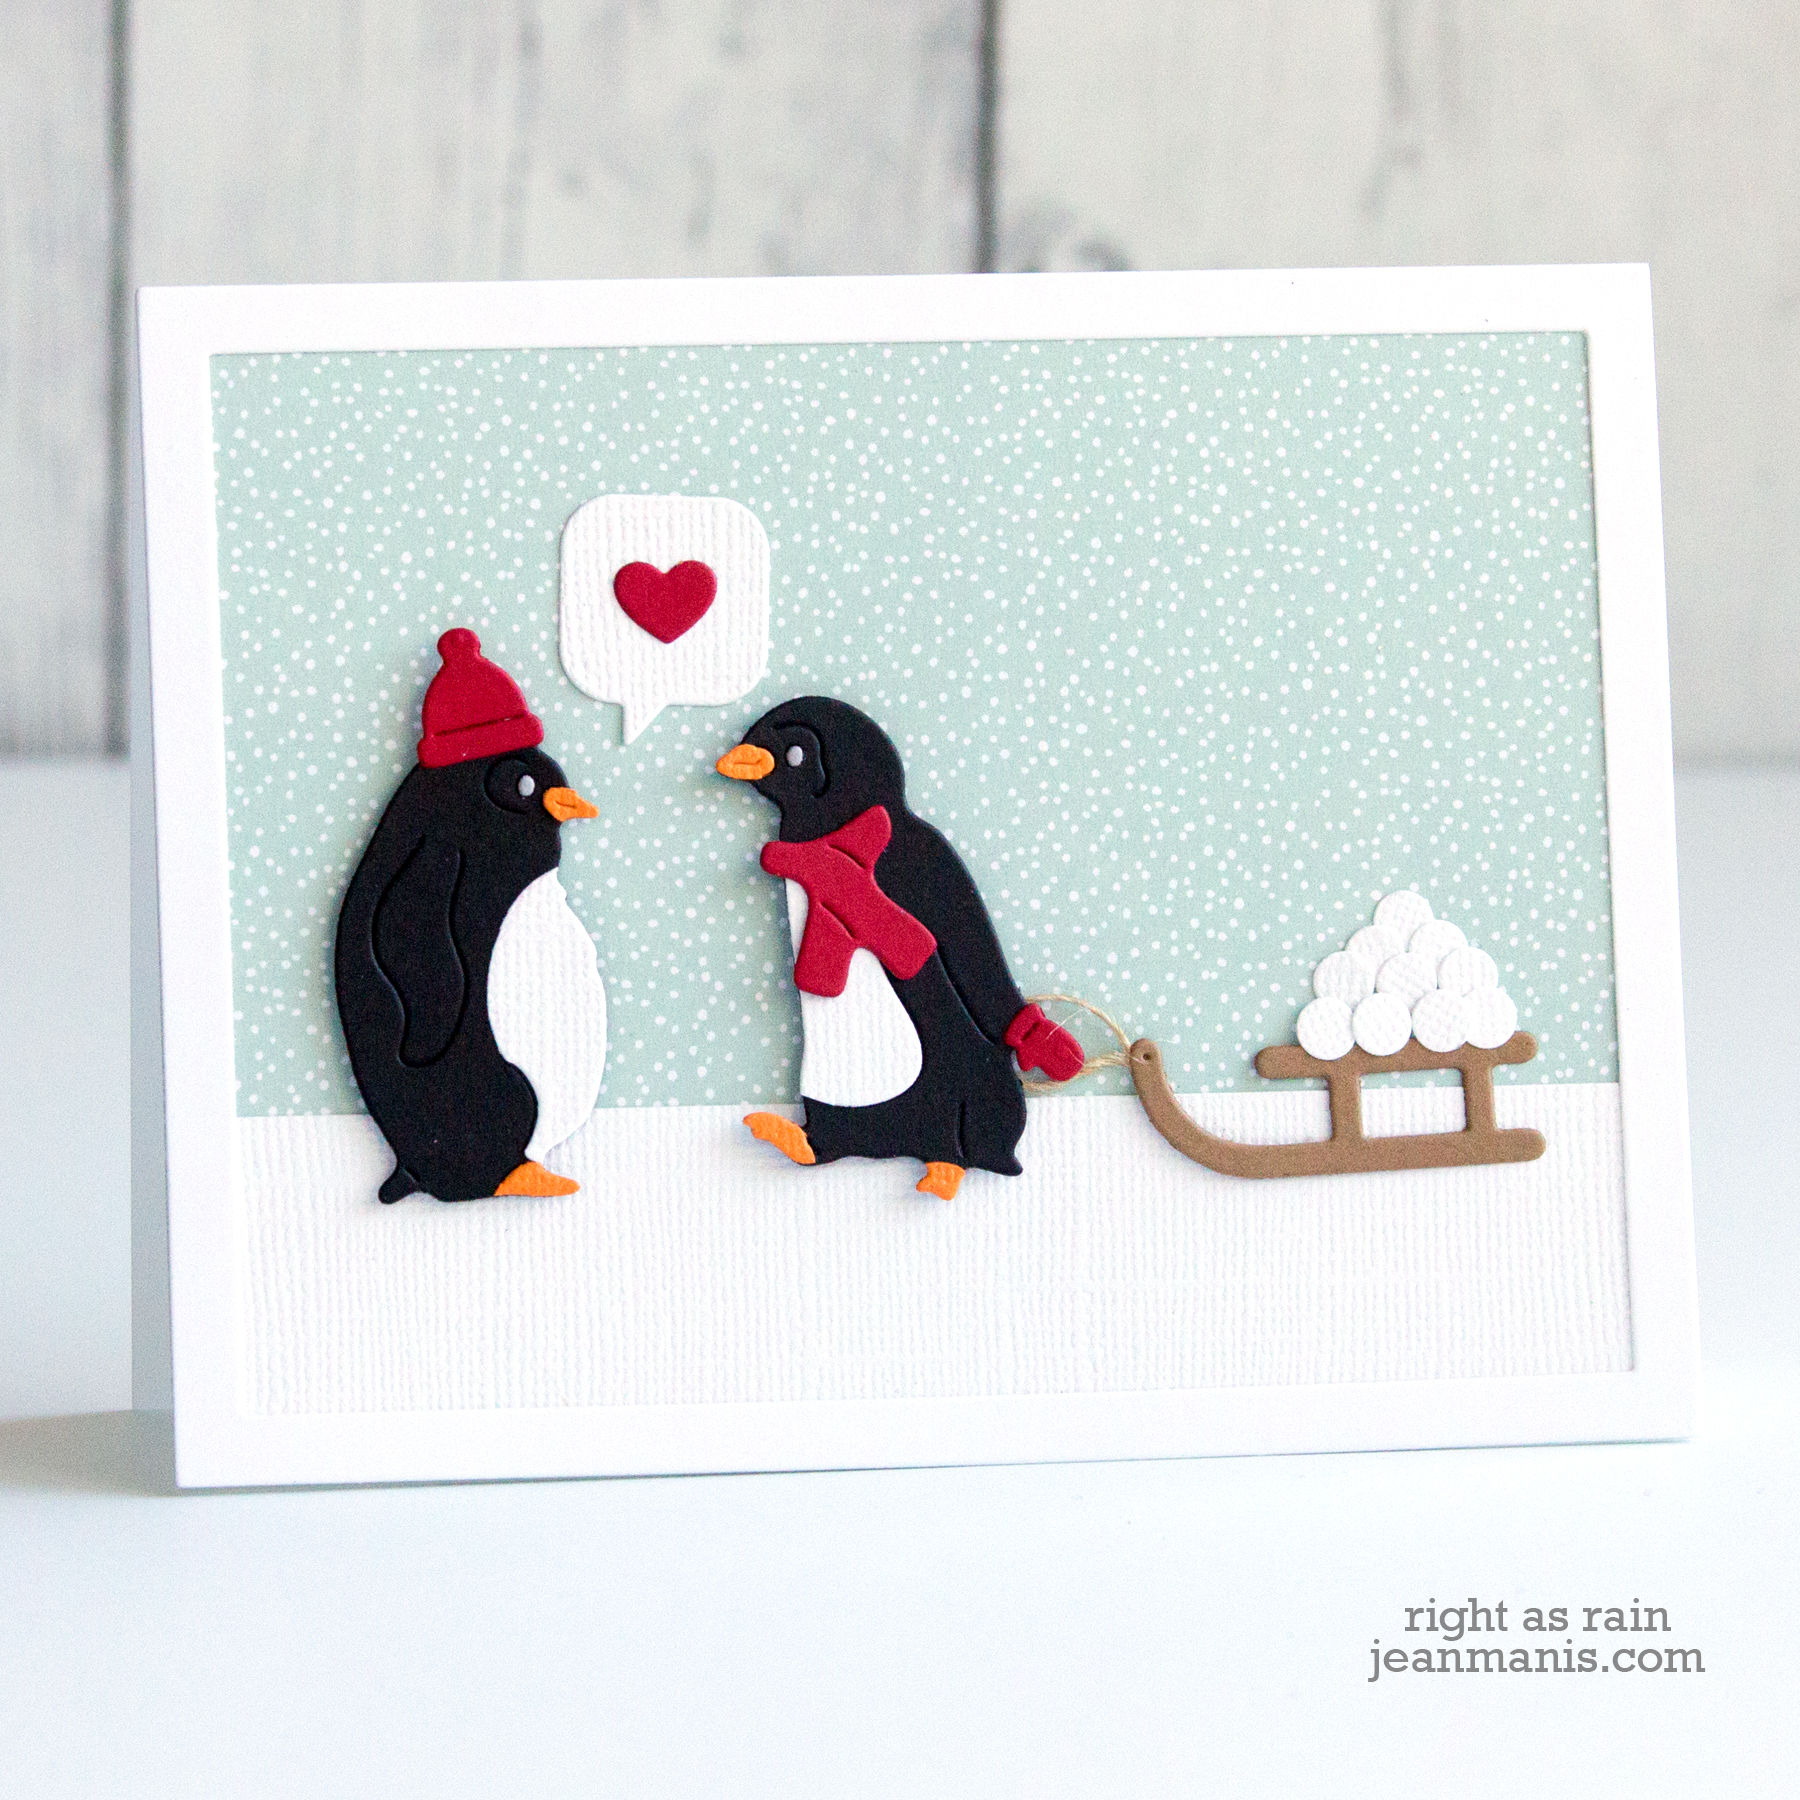 Cardmaking with a Winter Theme